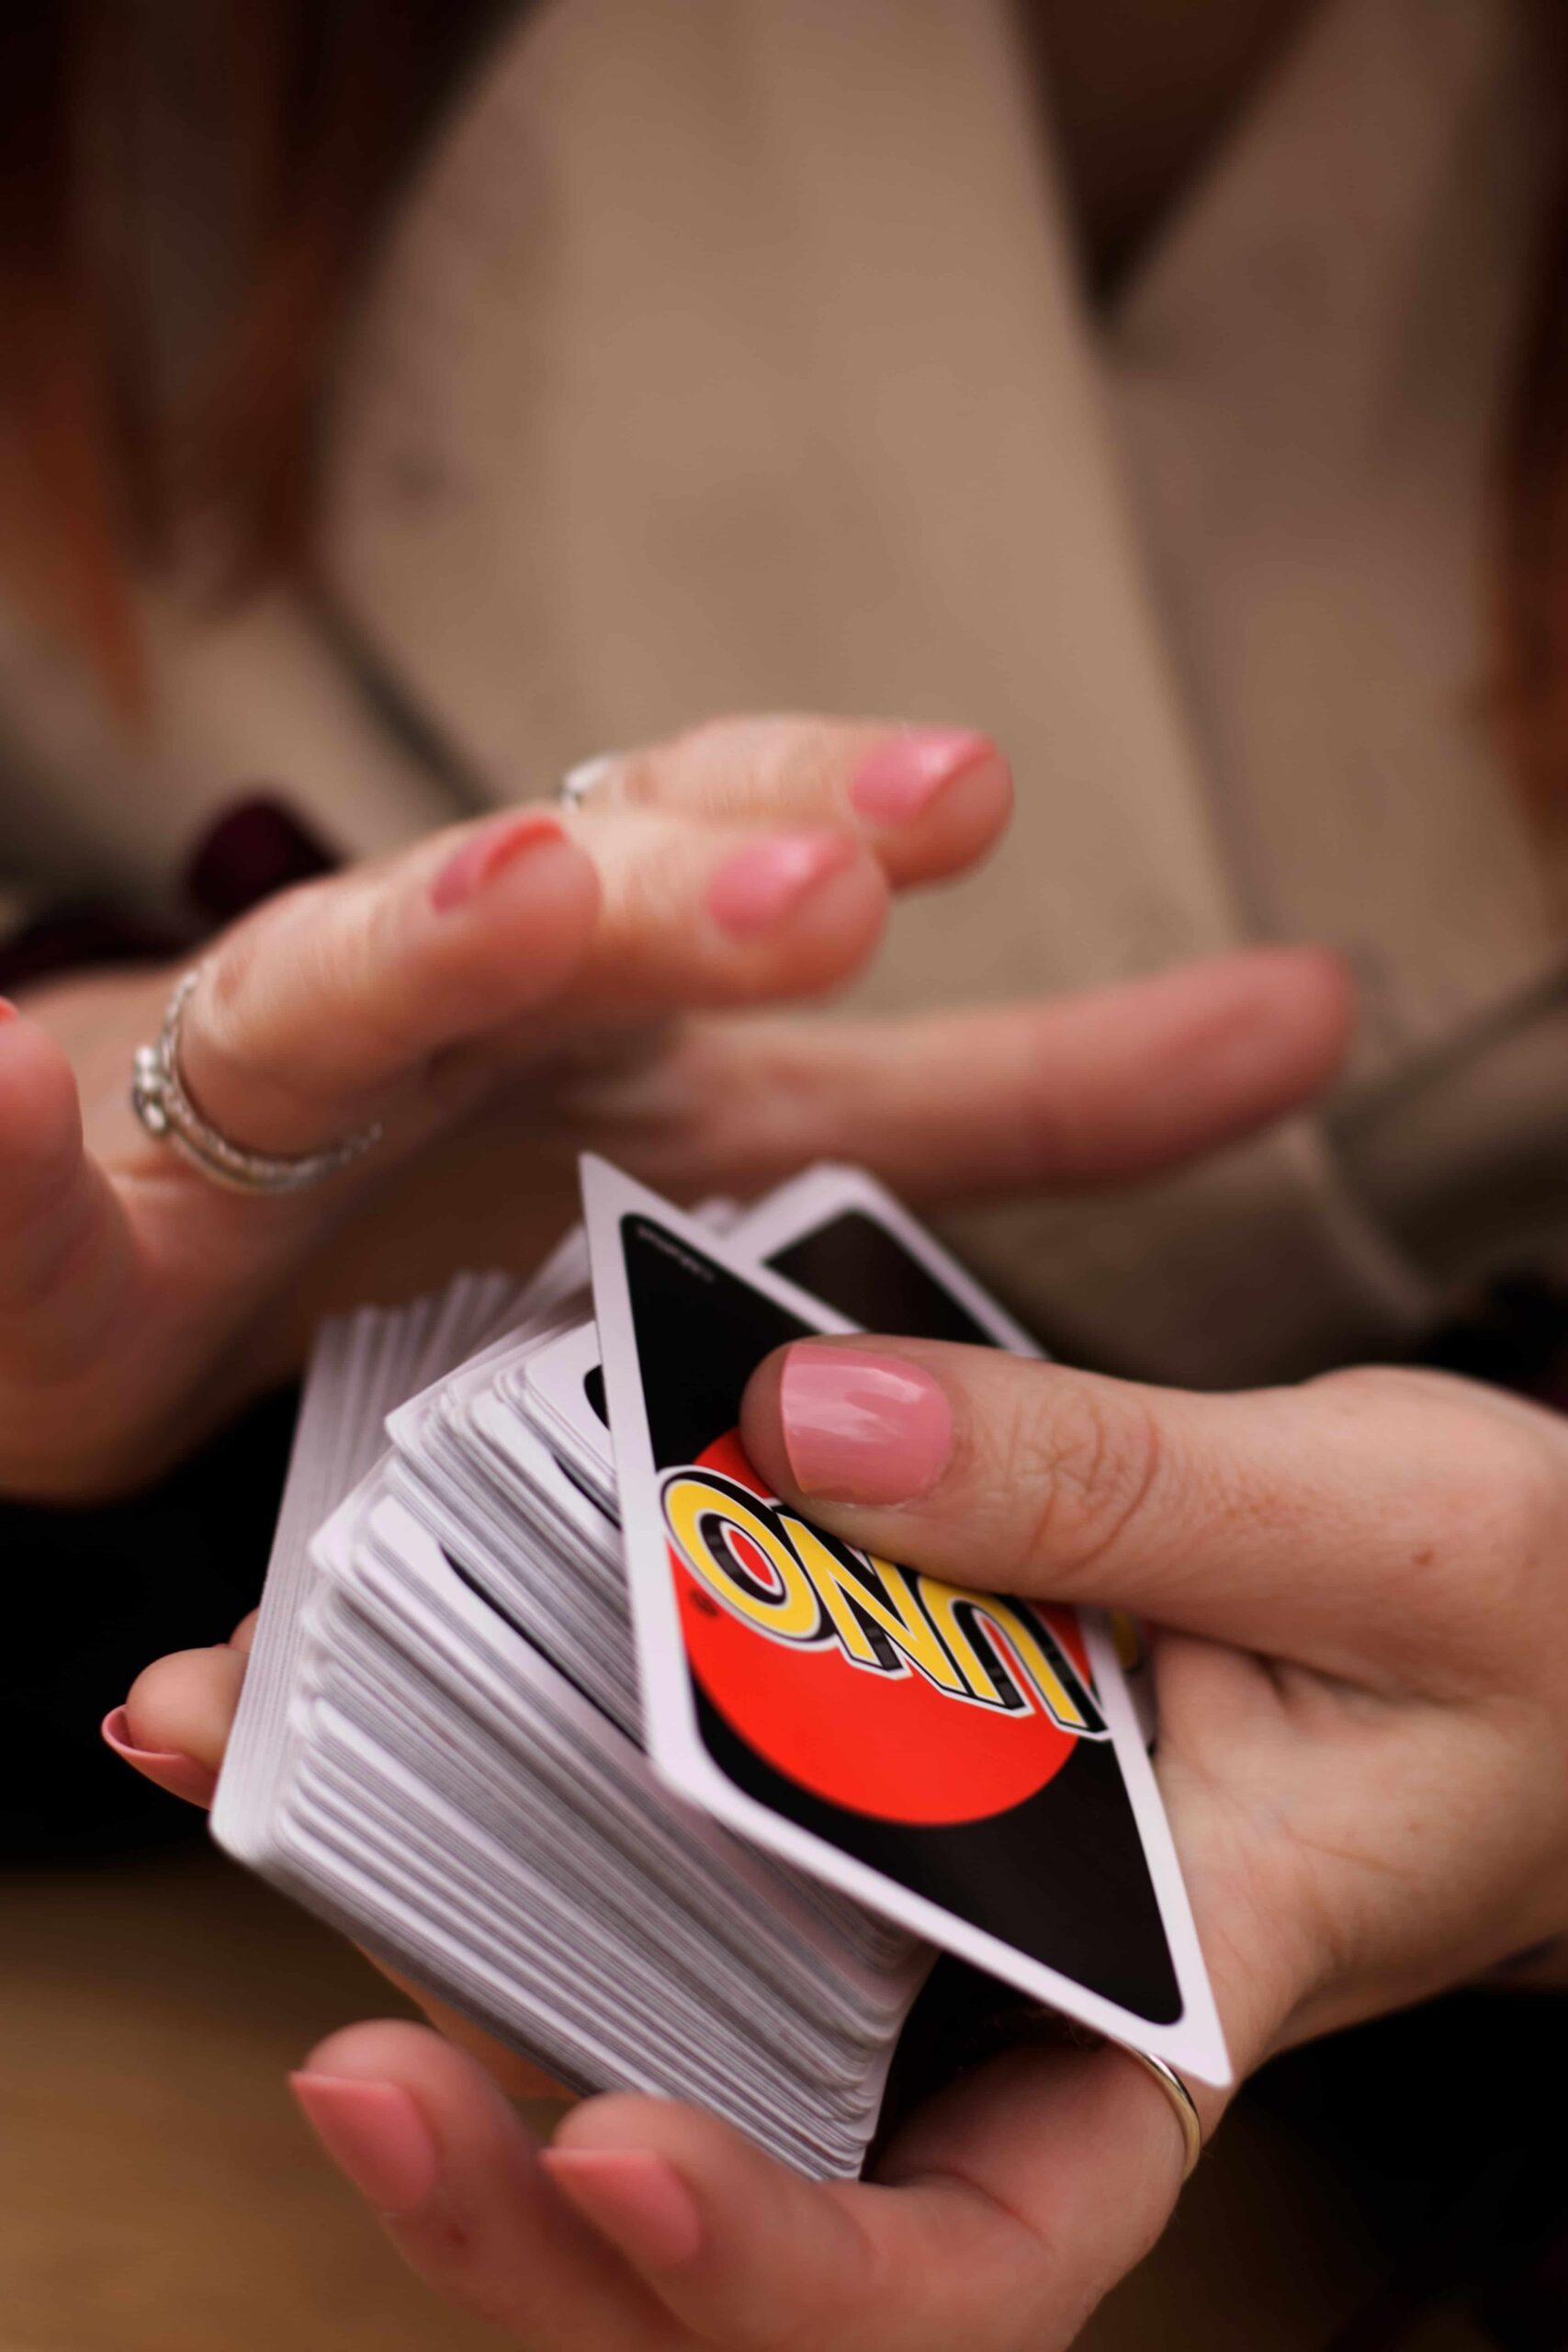 what does the shuffle hands card mean in uno